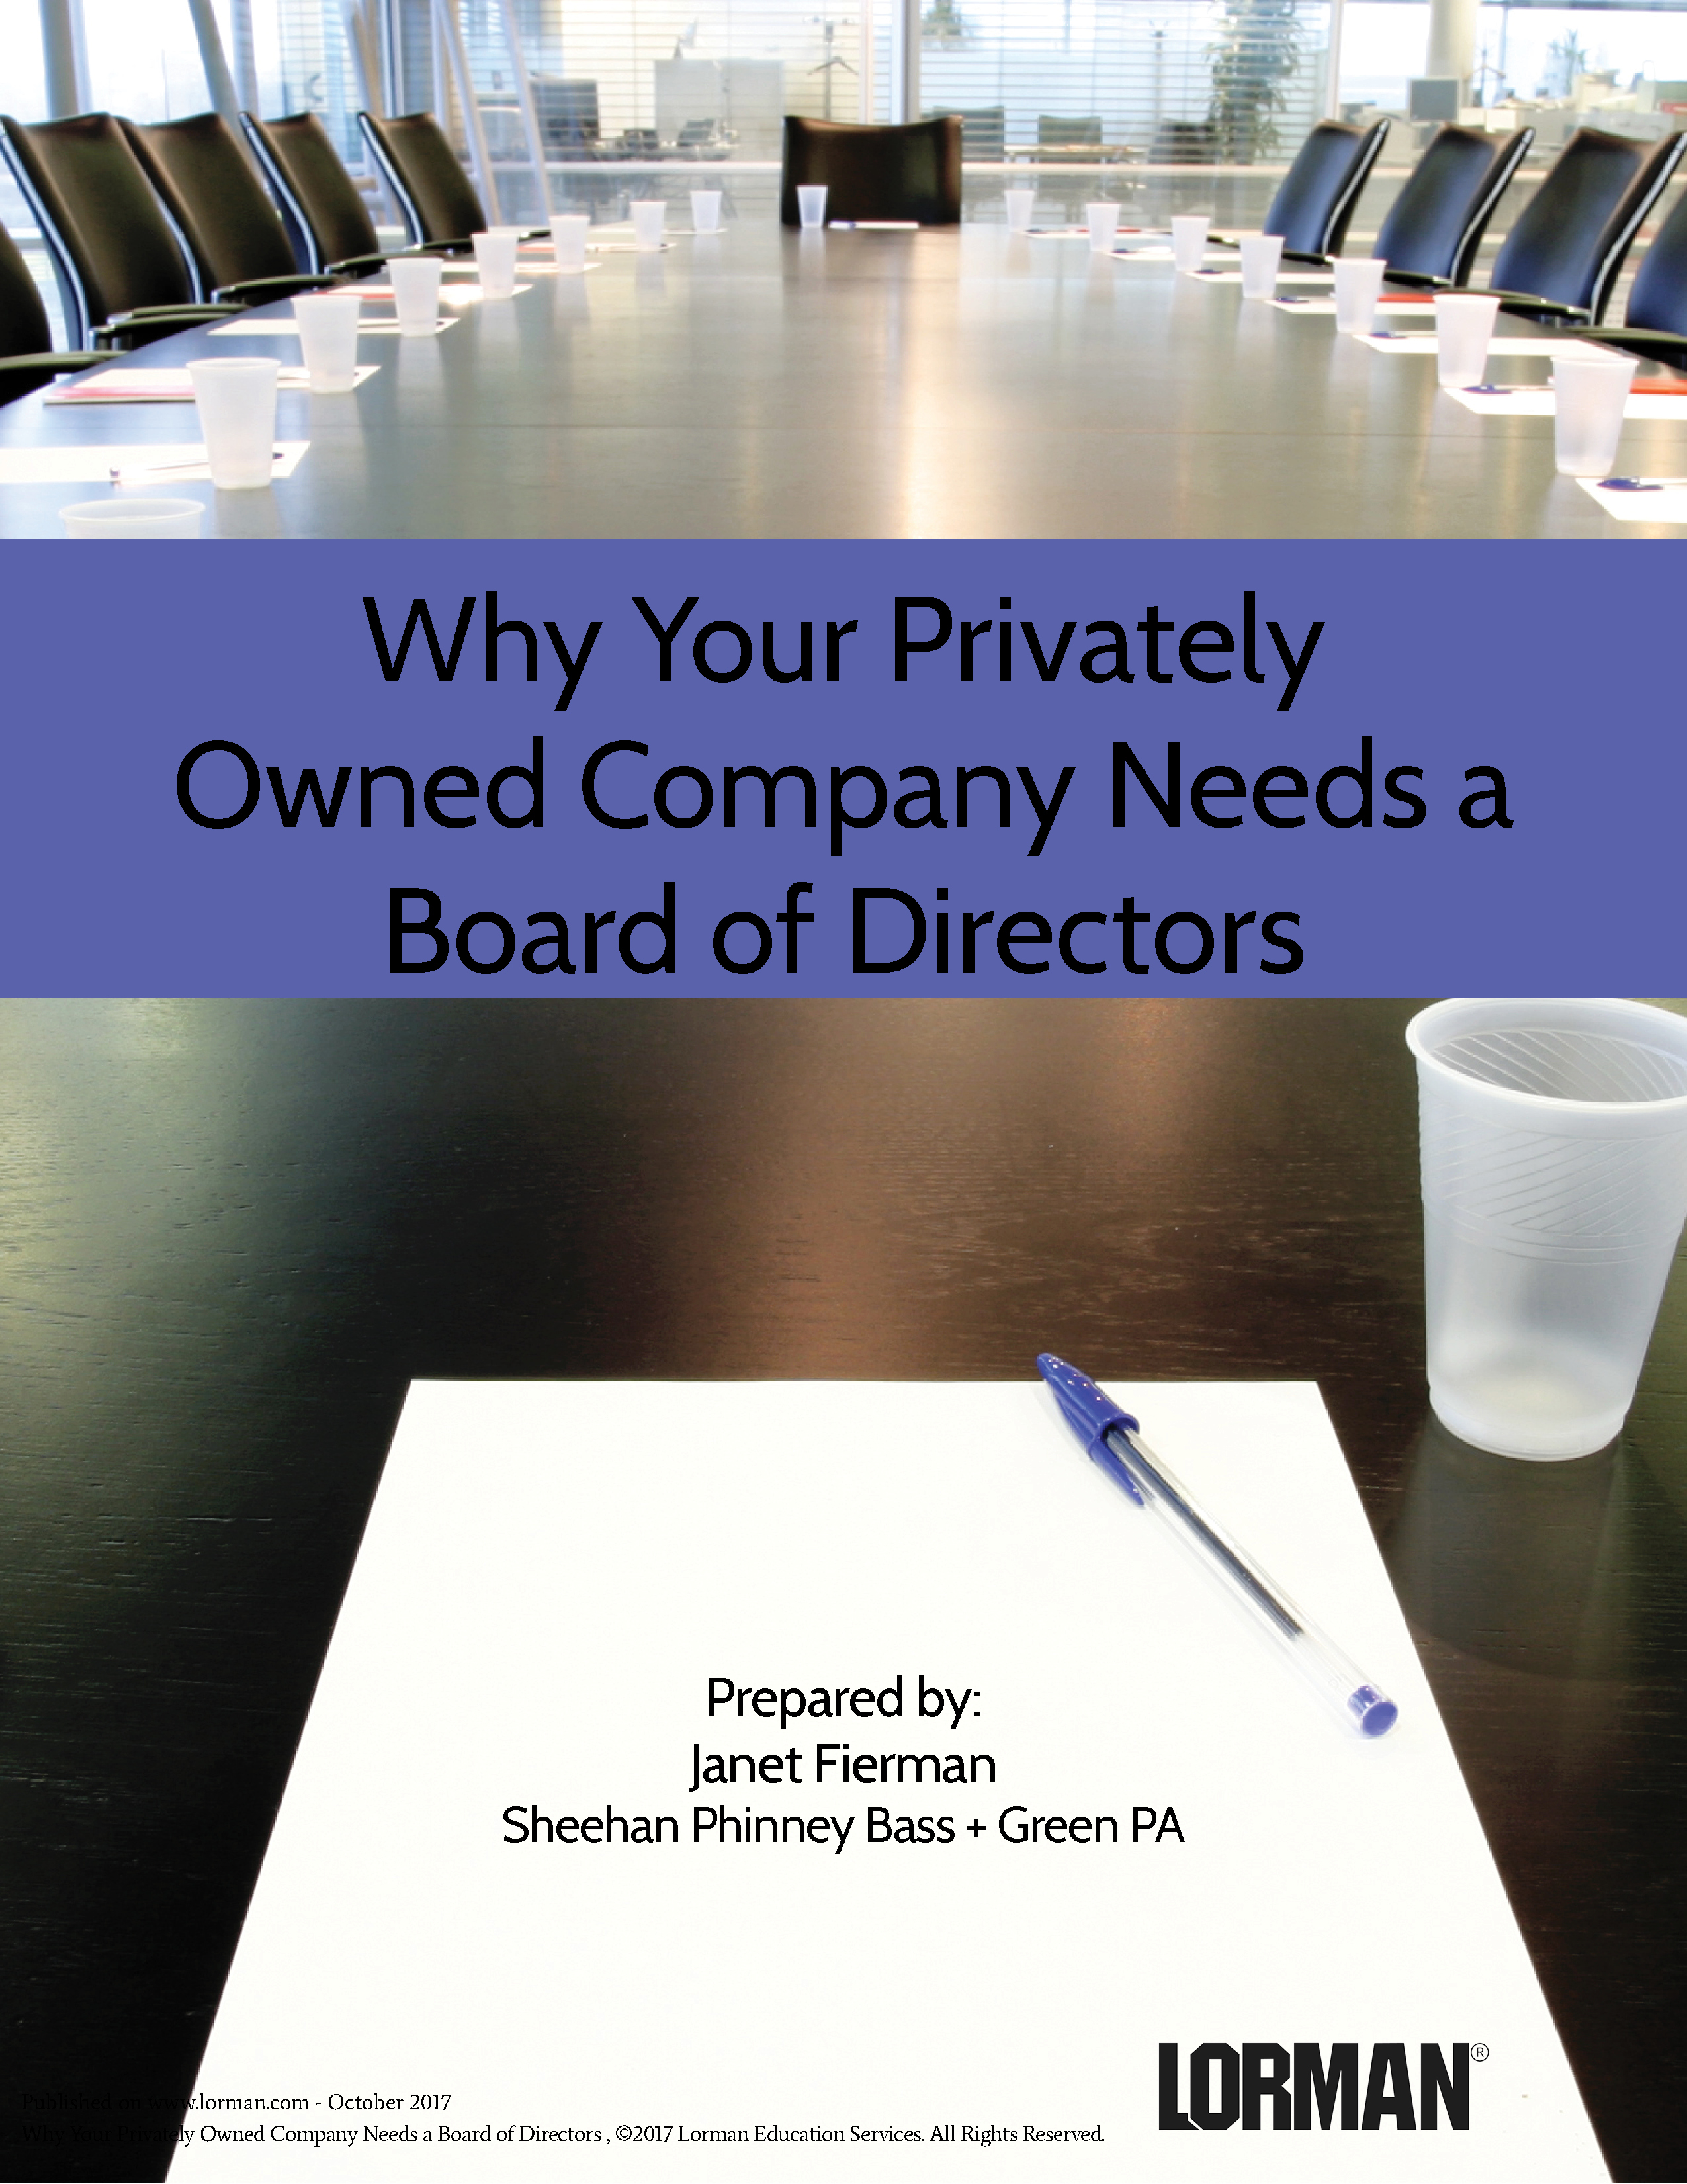 Why Your Privately Owned Company Needs a Board of Directors